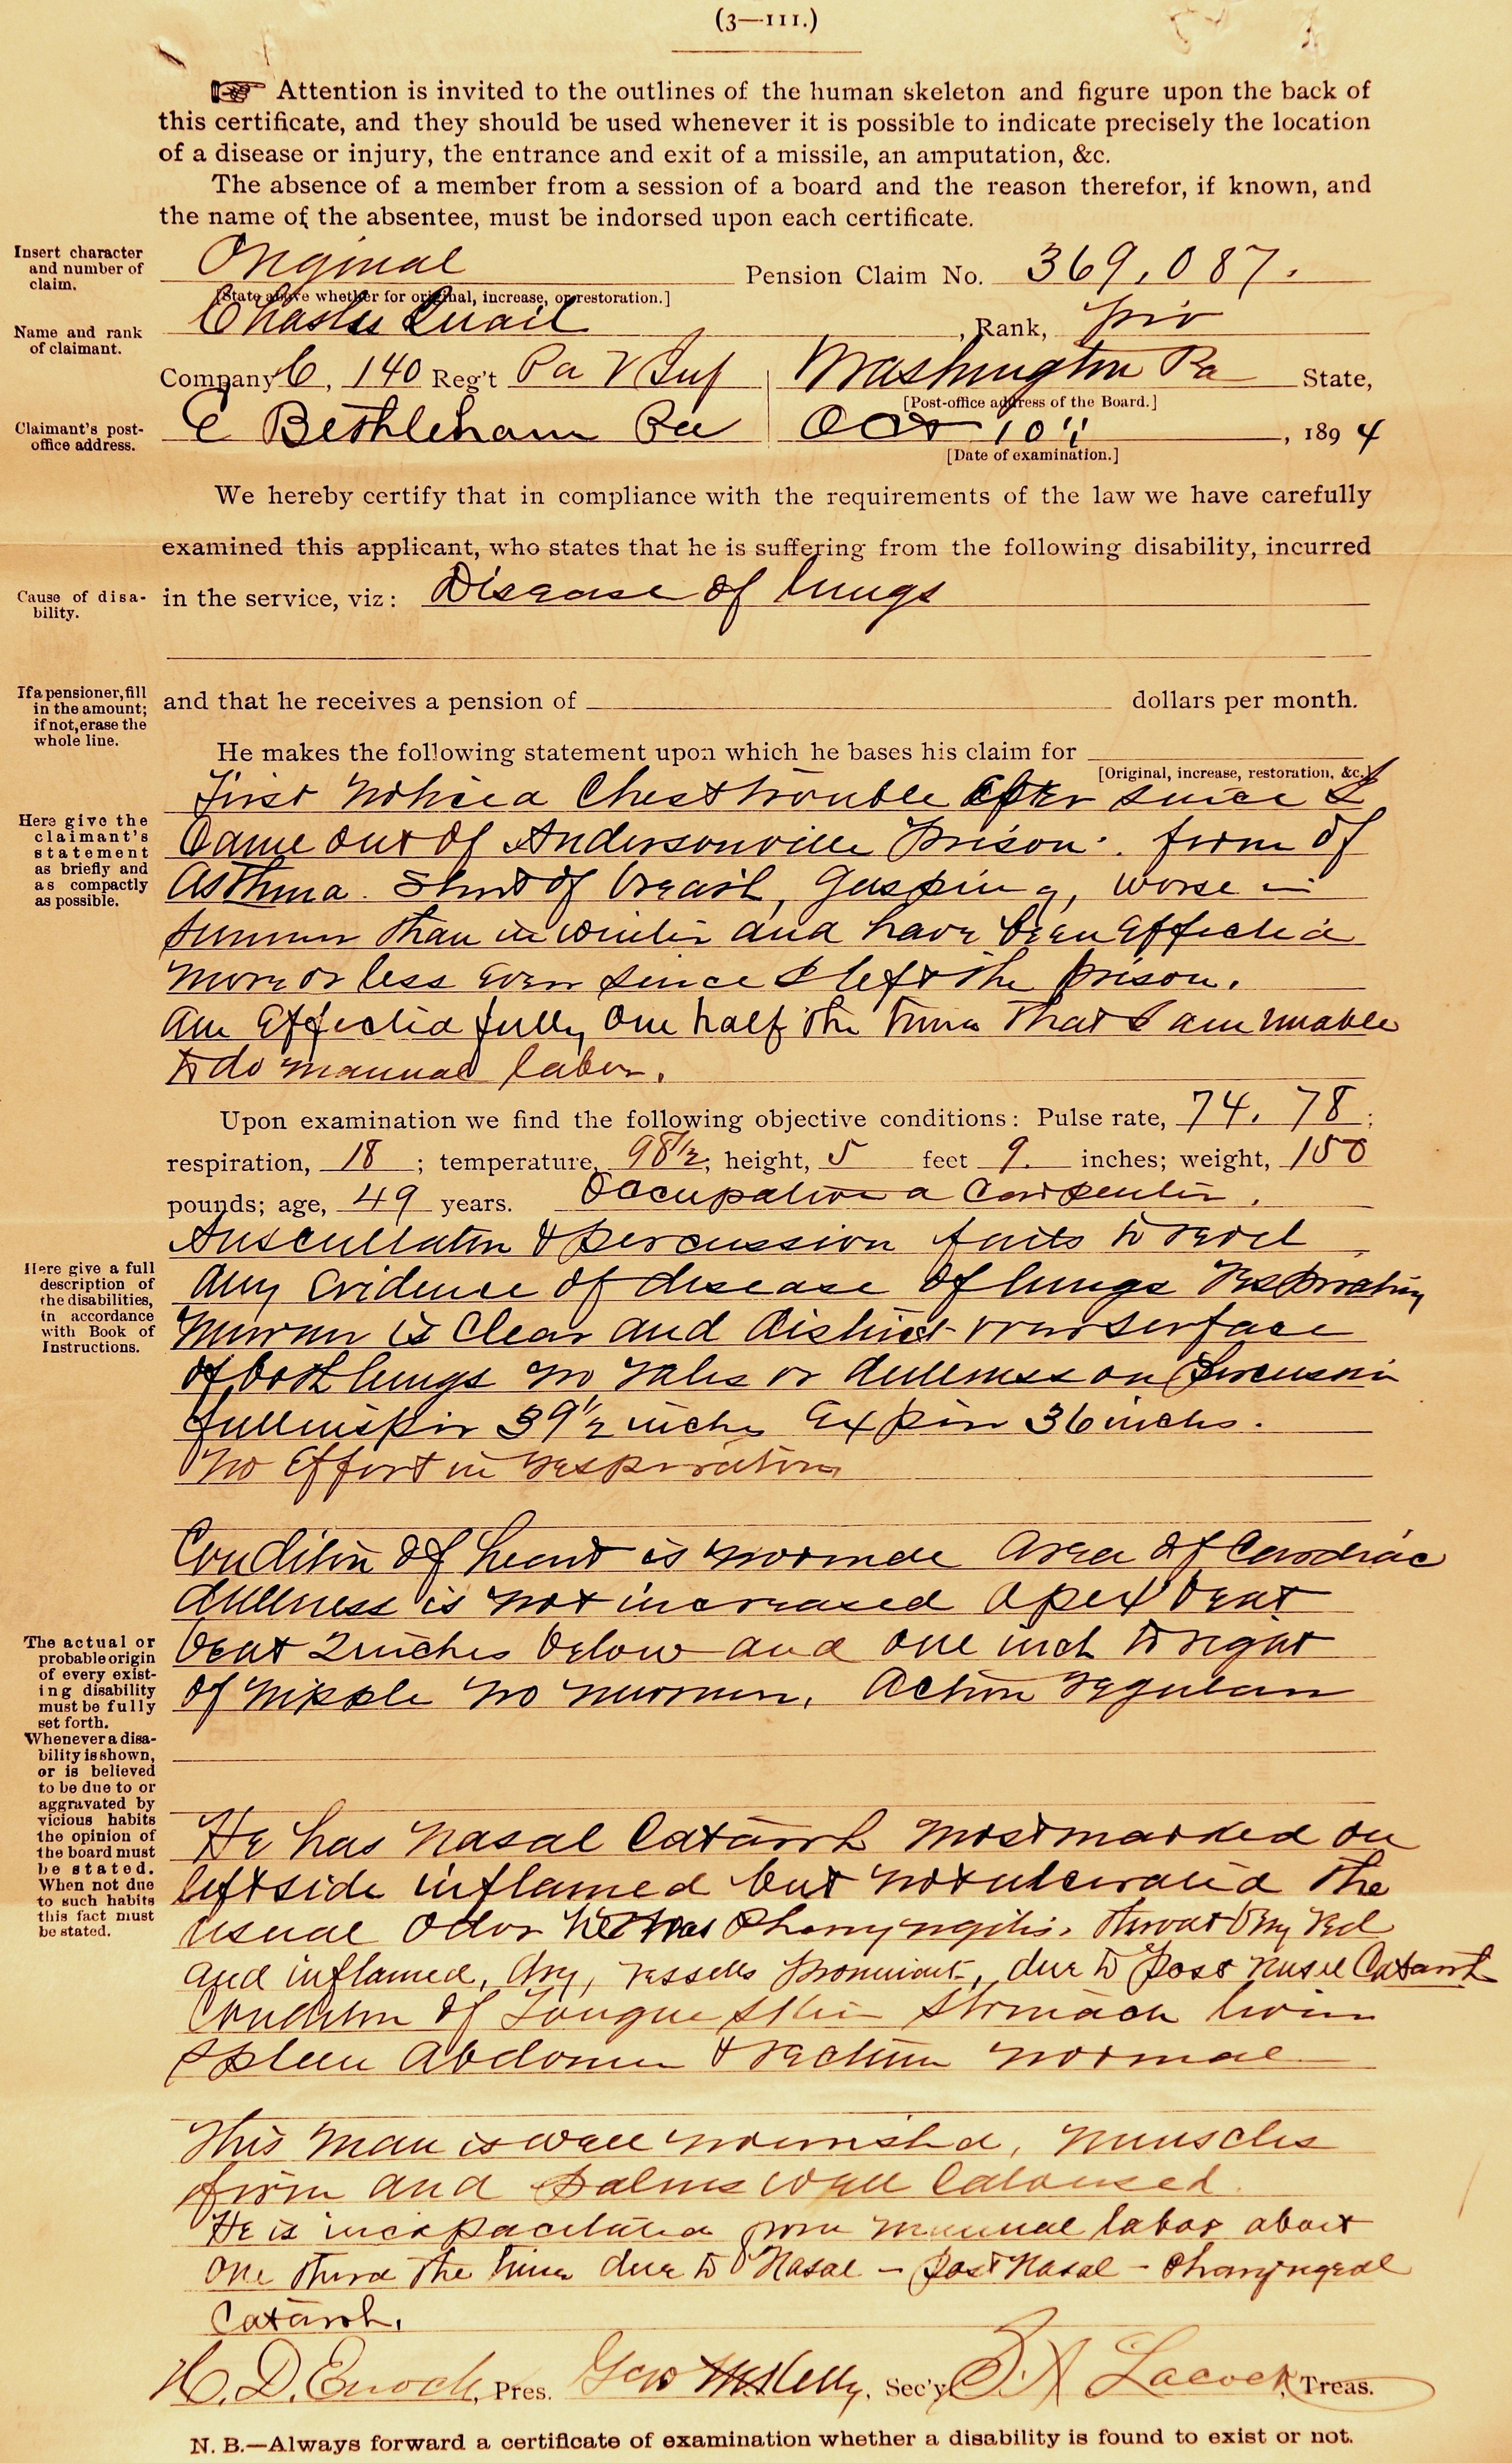 Image of a surgeon's certificate for Charles Quail's 1894 pension application